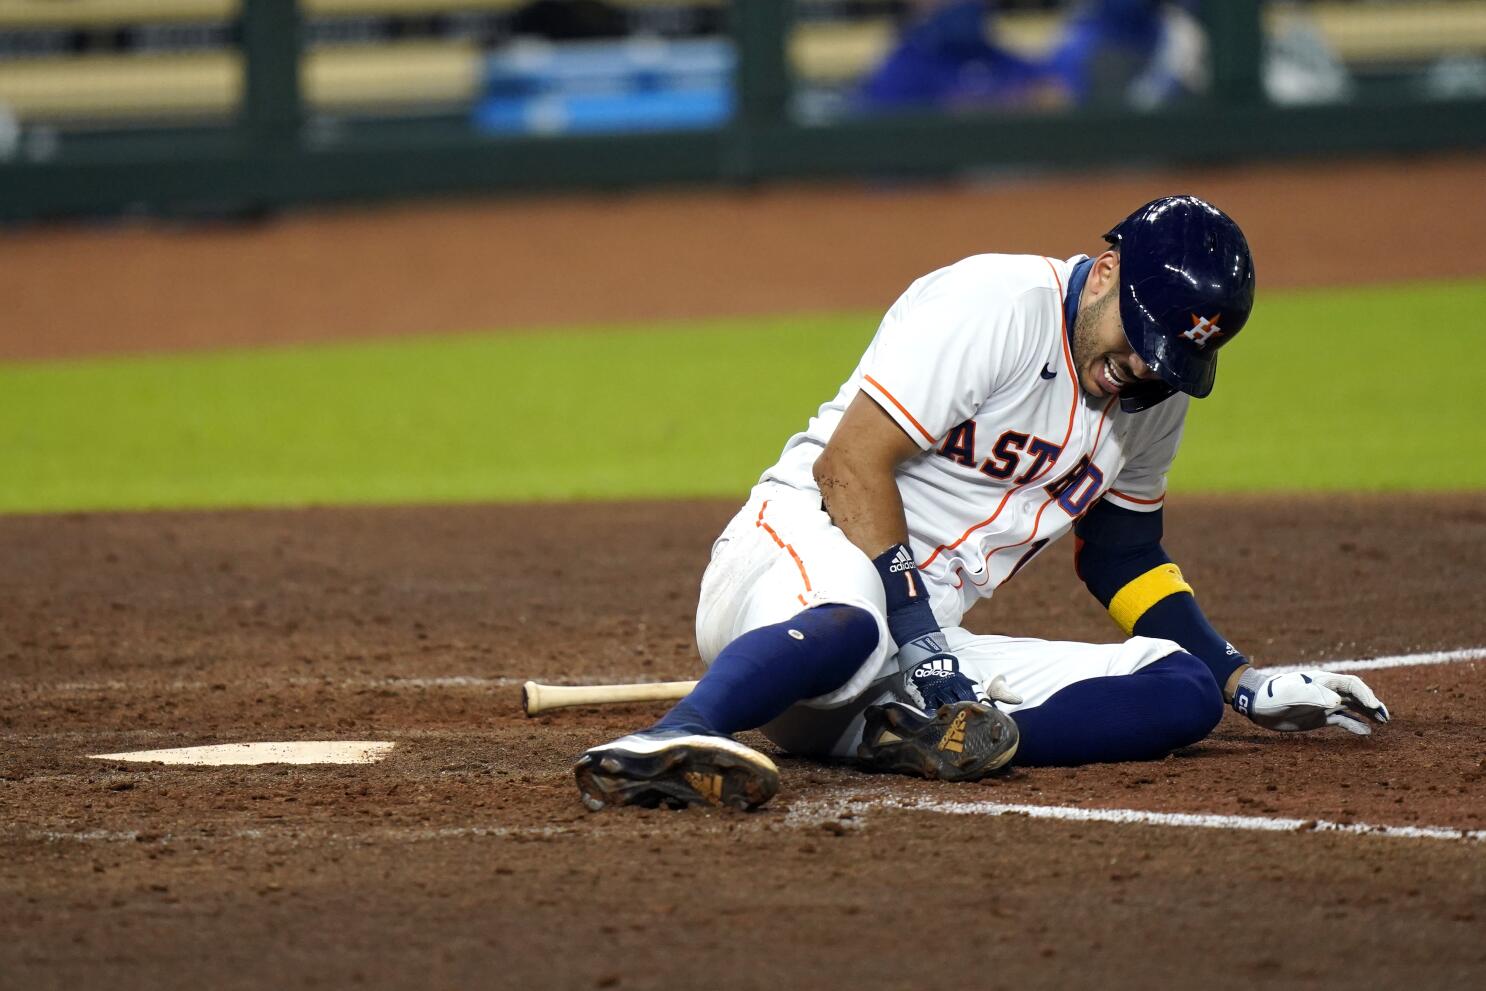 ALCS: Carlos Correa Leads the Astros, On and Off the Field - The